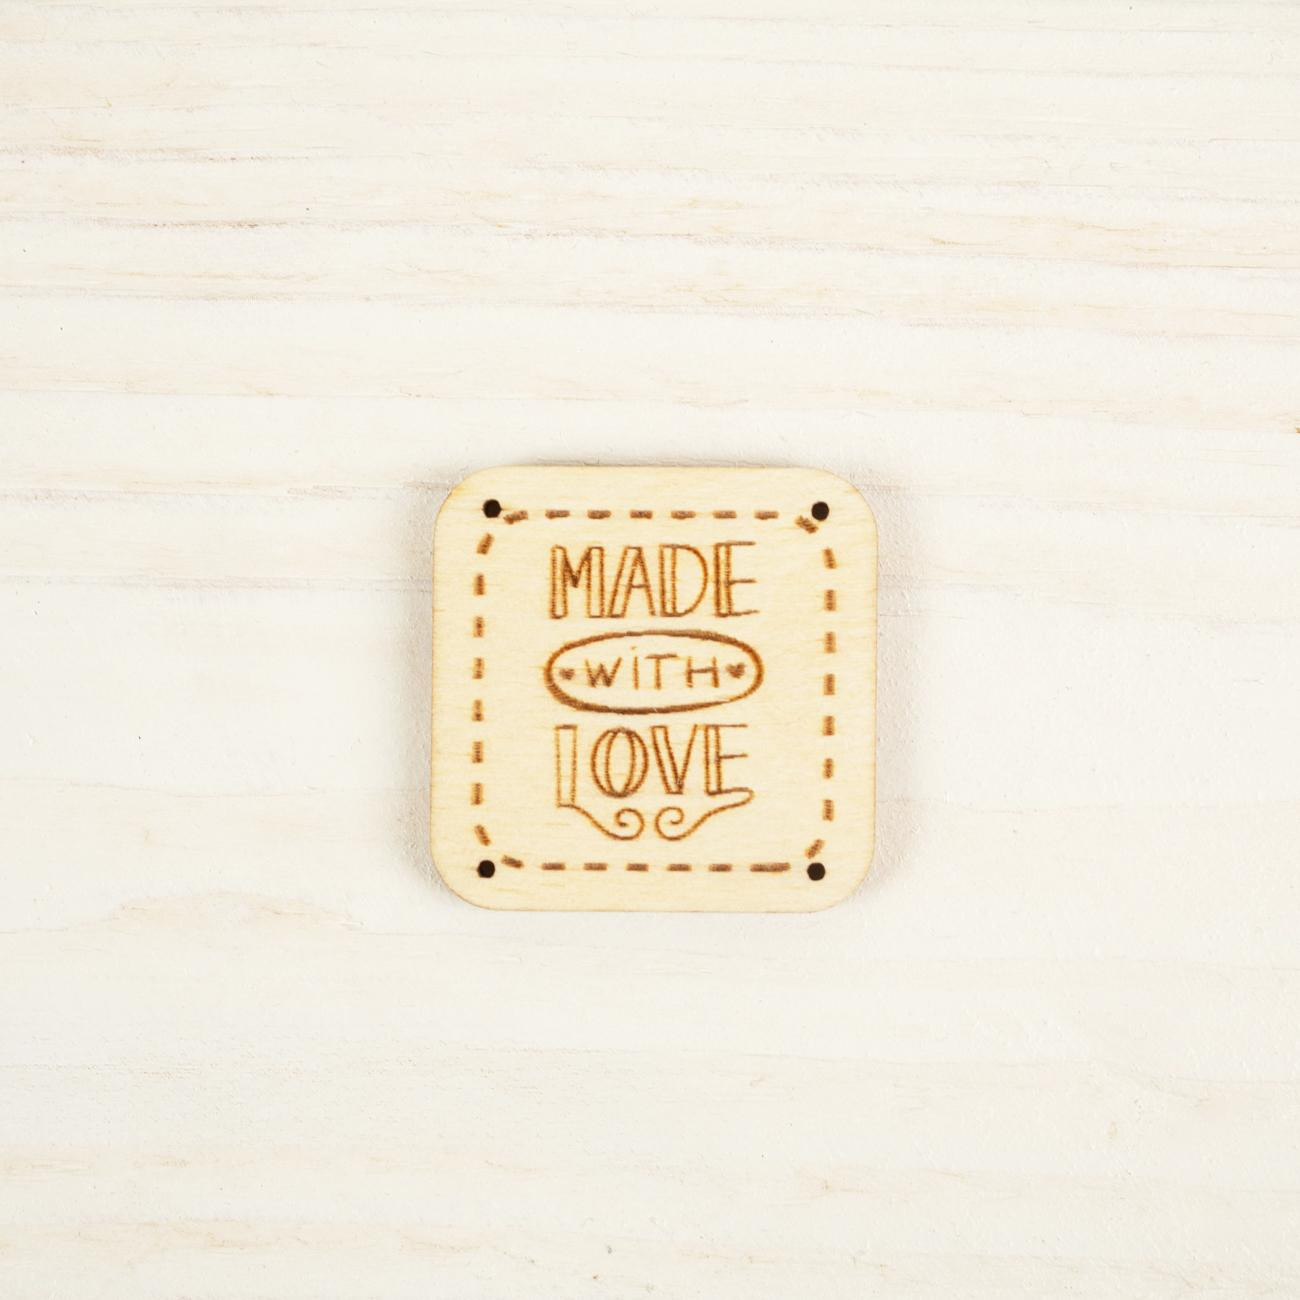 Wooden label square - MADE WITH LOVE / PAT. 4